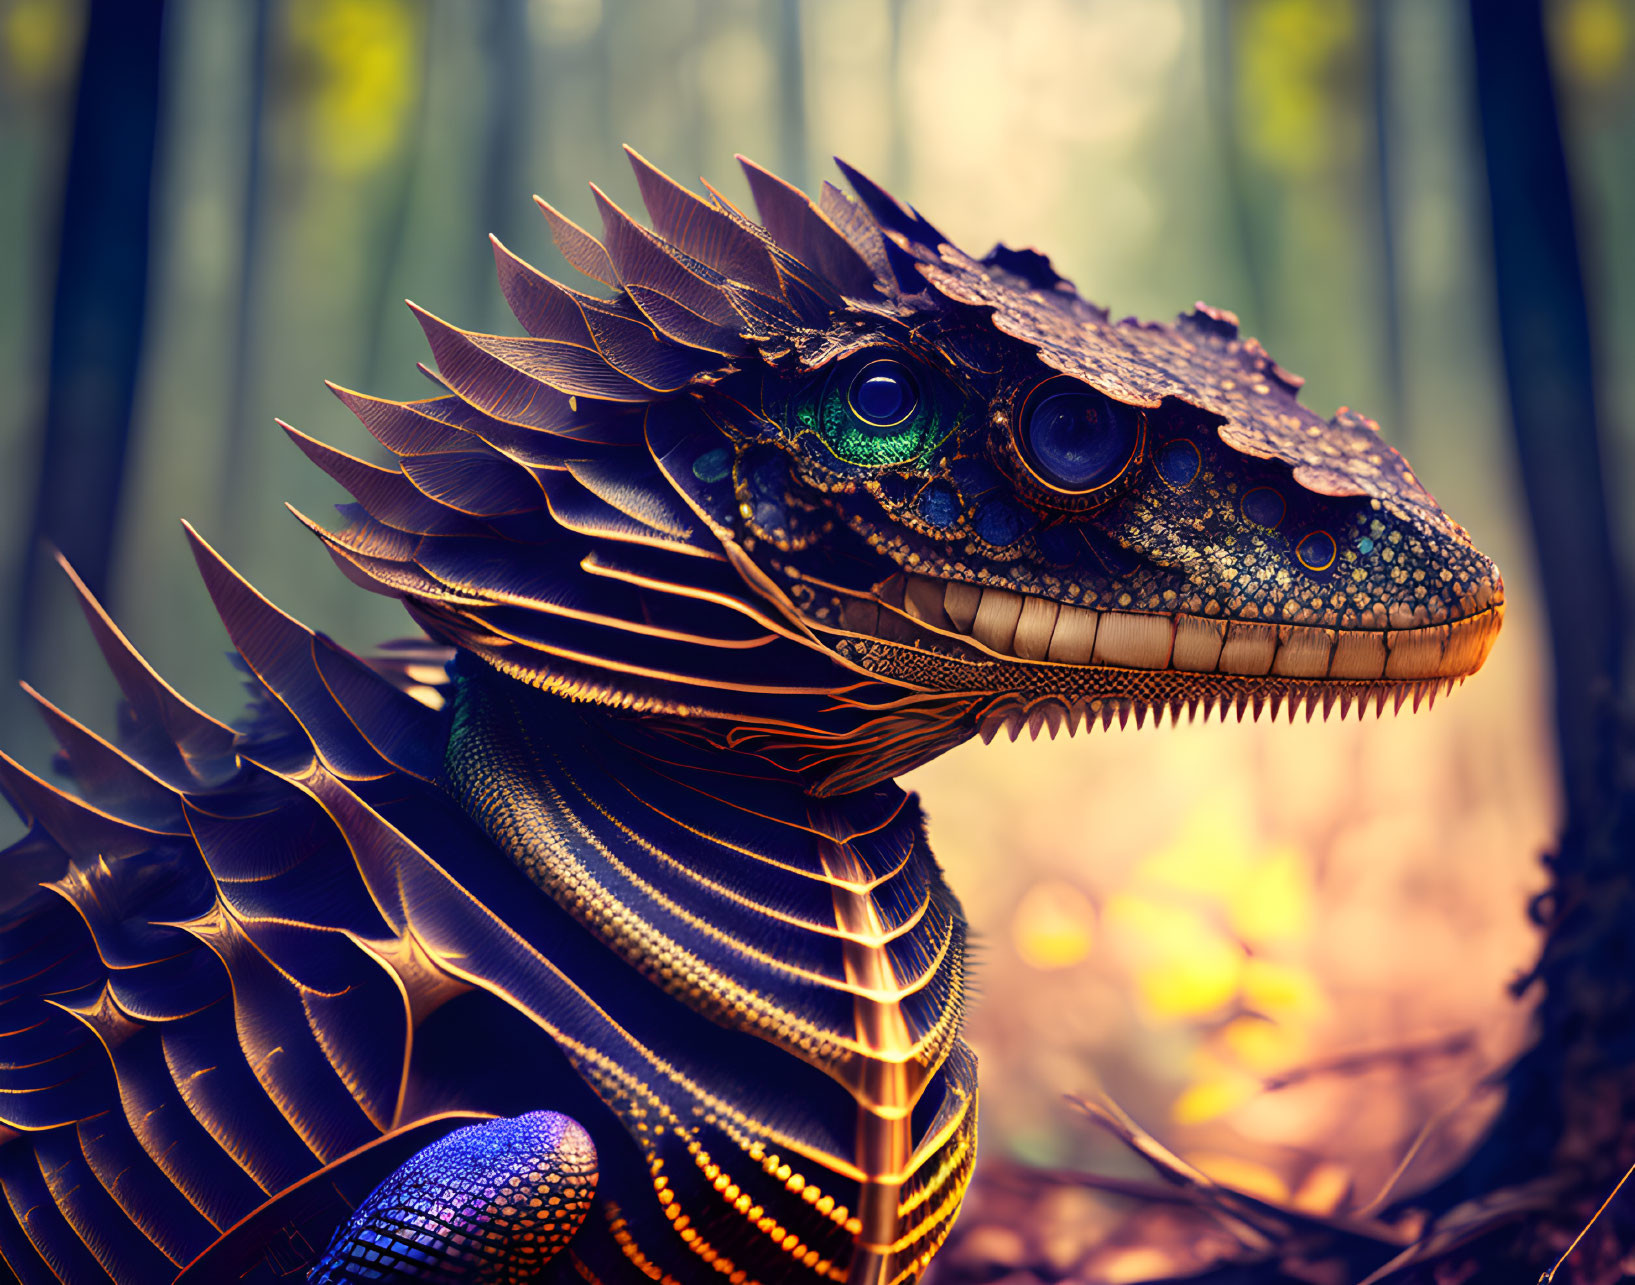 Detailed Digital Artwork: Mechanical Lizard with Metal Scales in Forest Setting